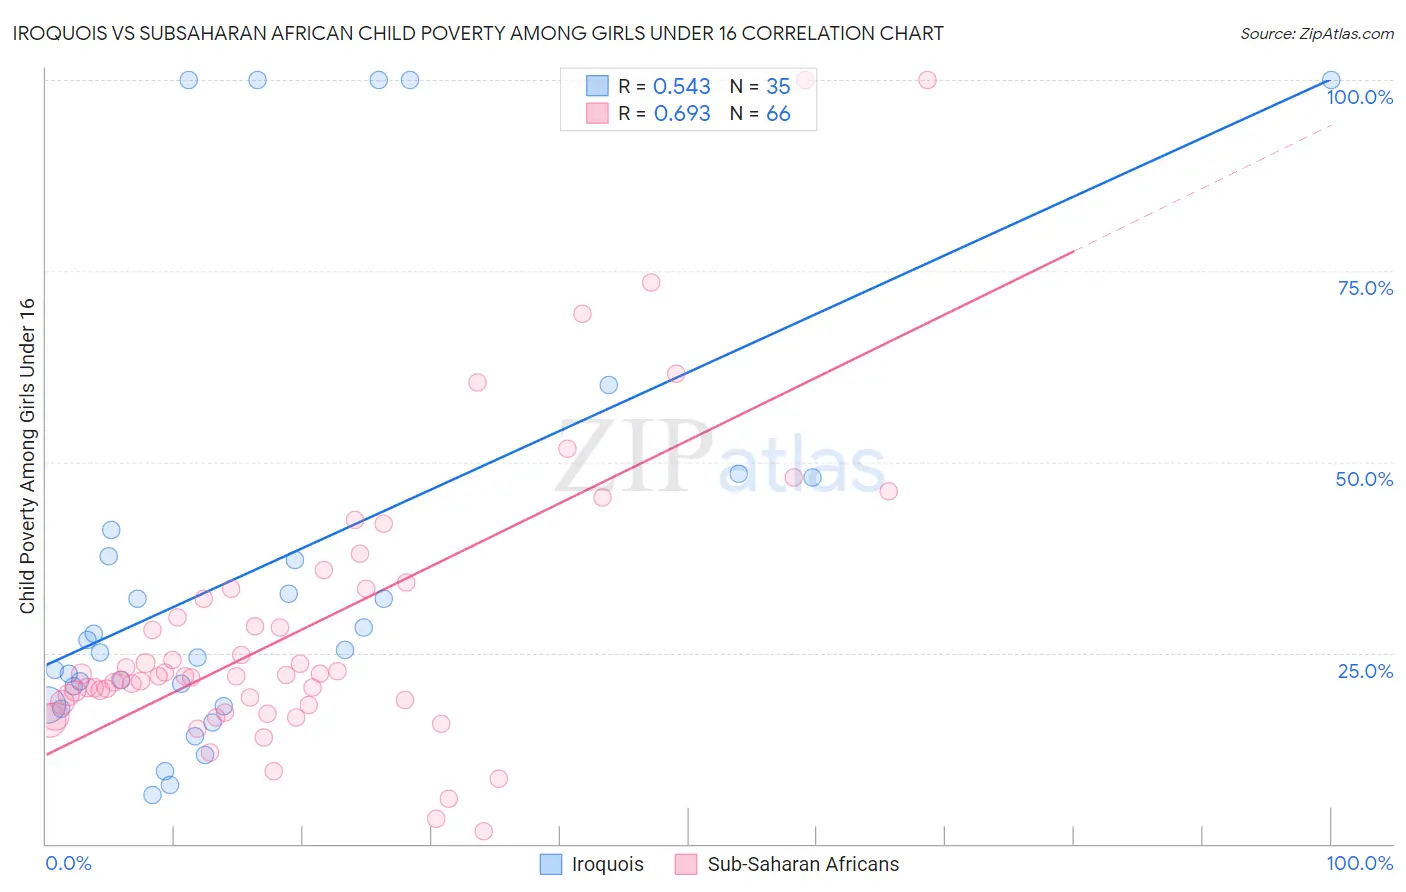 Iroquois vs Subsaharan African Child Poverty Among Girls Under 16